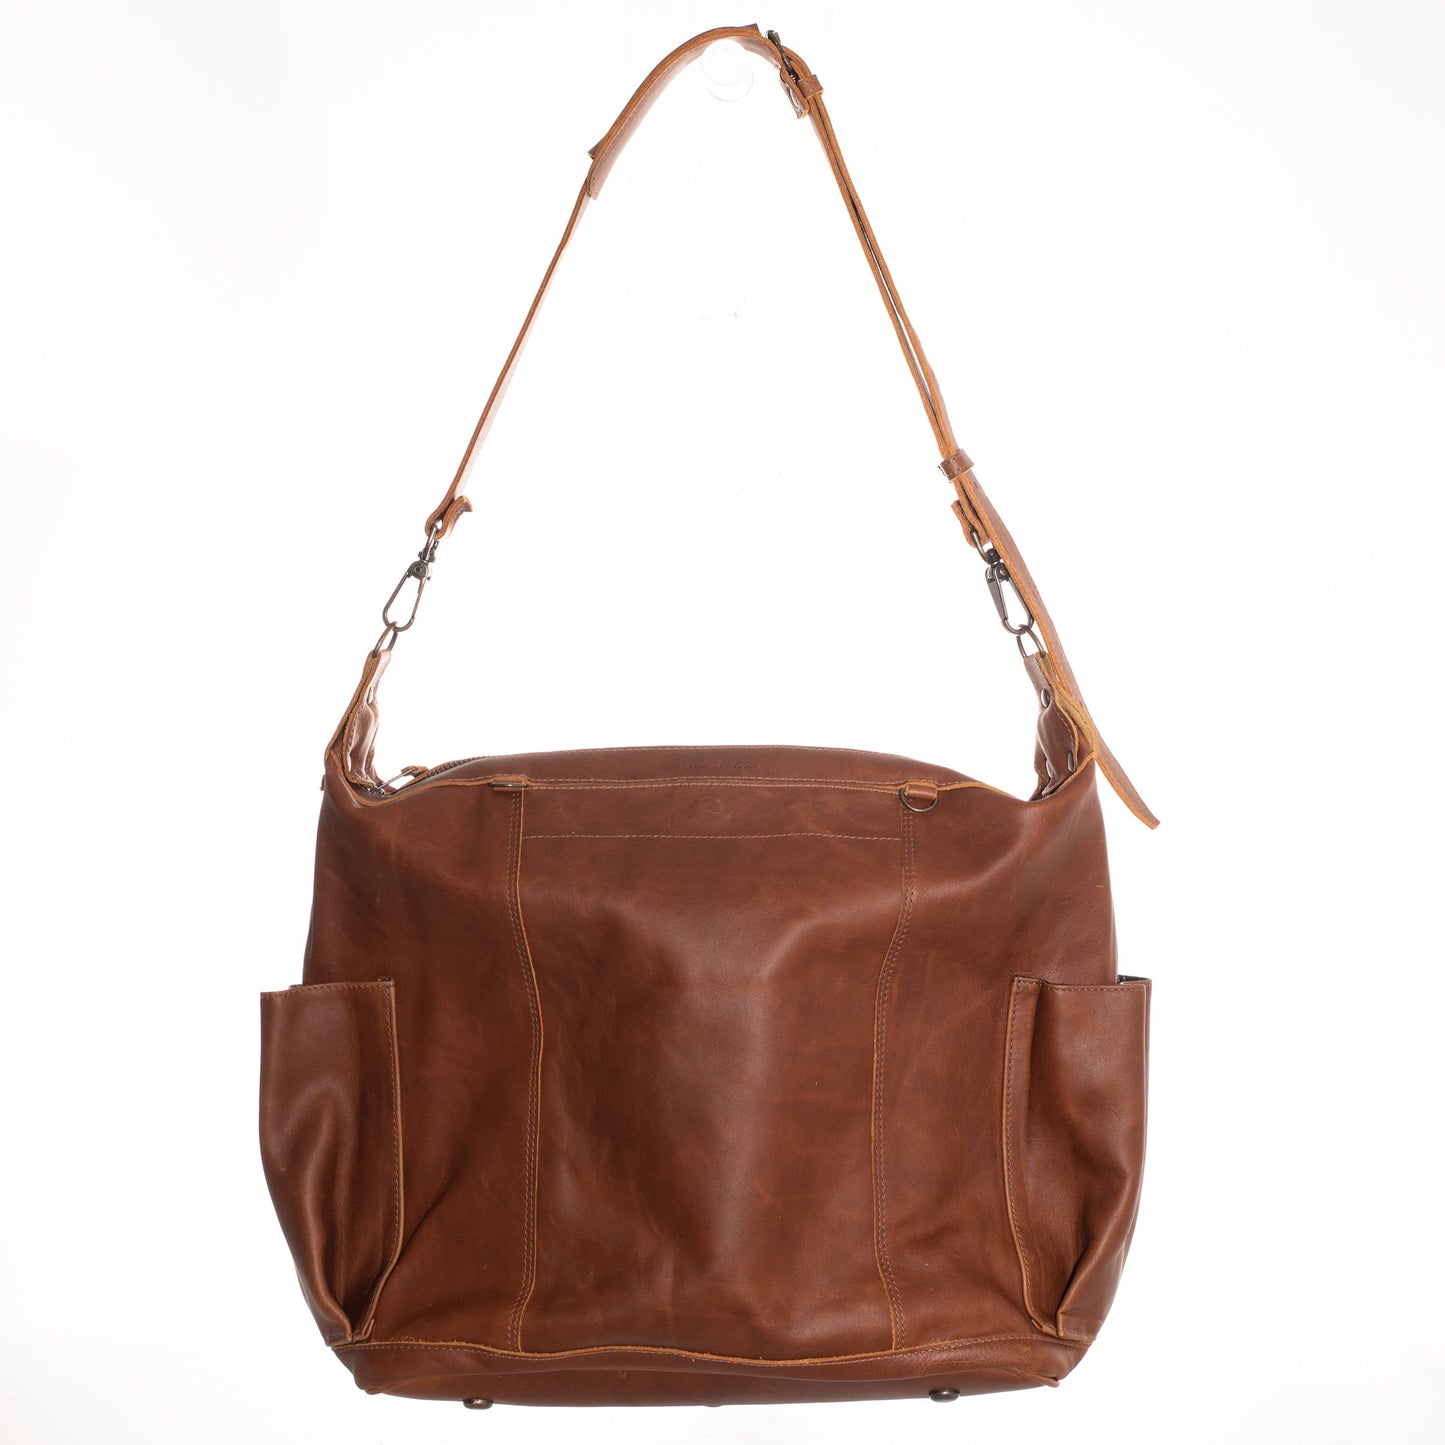 BEATRIZ CONVERTIBLE DAY BAG - FULL LEATHER - CAFE